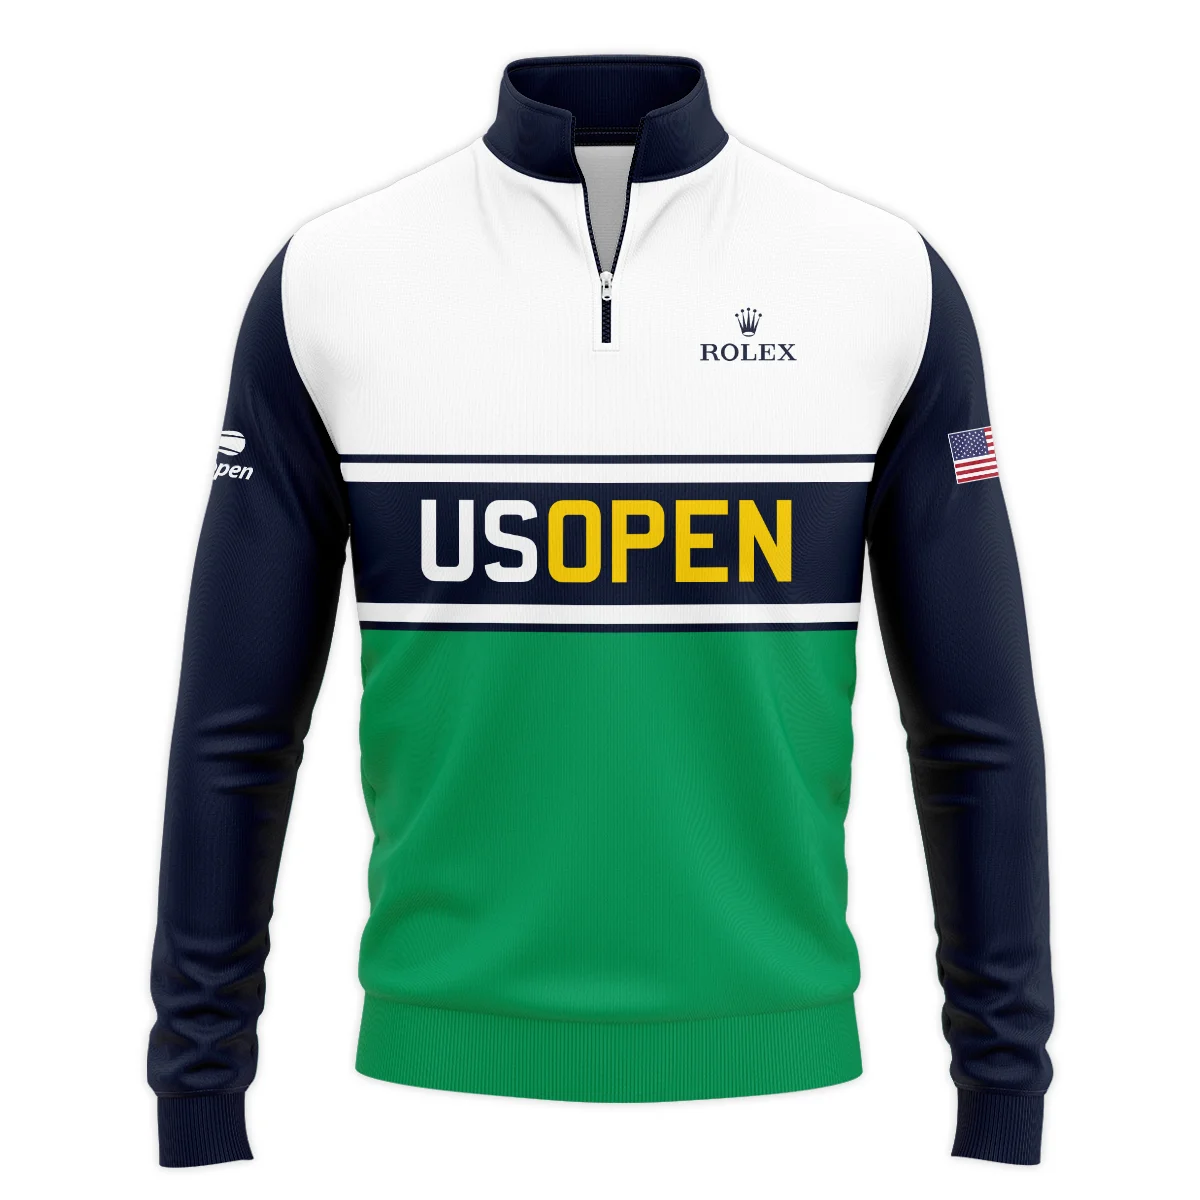 Tennis Love Sport Mix Color US Open Tennis Champions Rolex Polo Shirt Style Classic Polo Shirt For Men